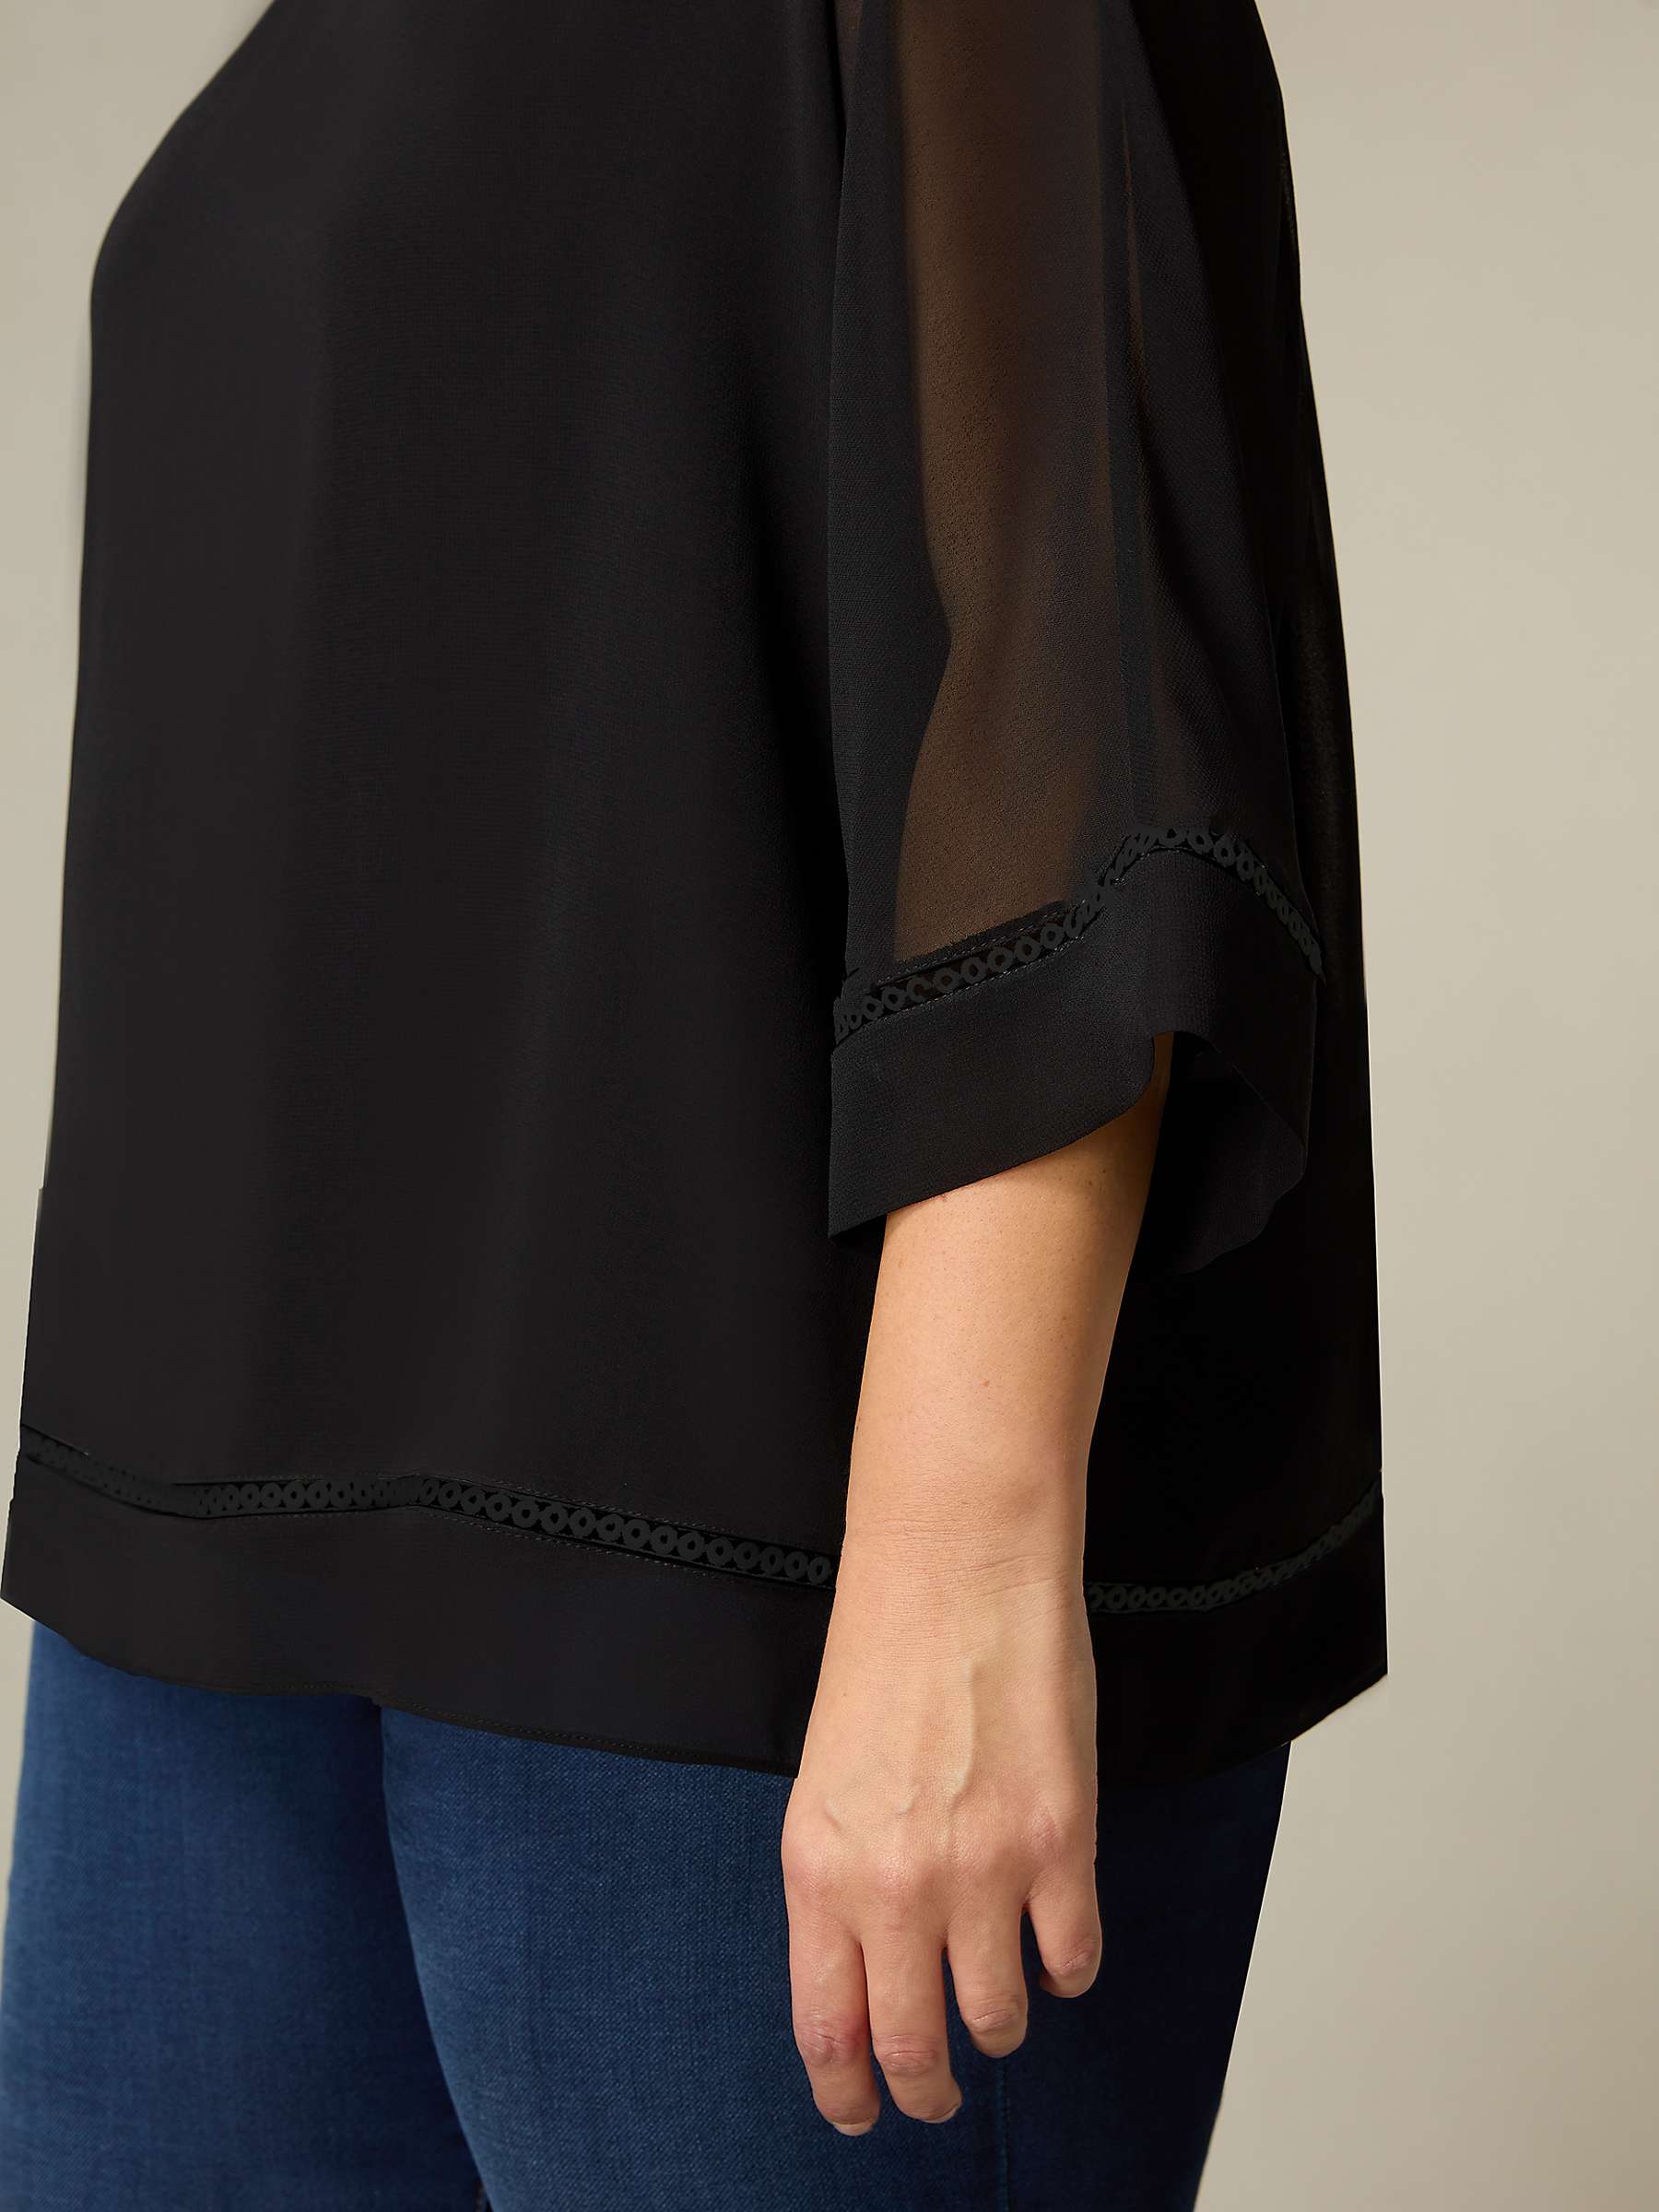 Buy Live Unlimited Curve Chiffon Trim Insert Overlay Top, Black Online at johnlewis.com